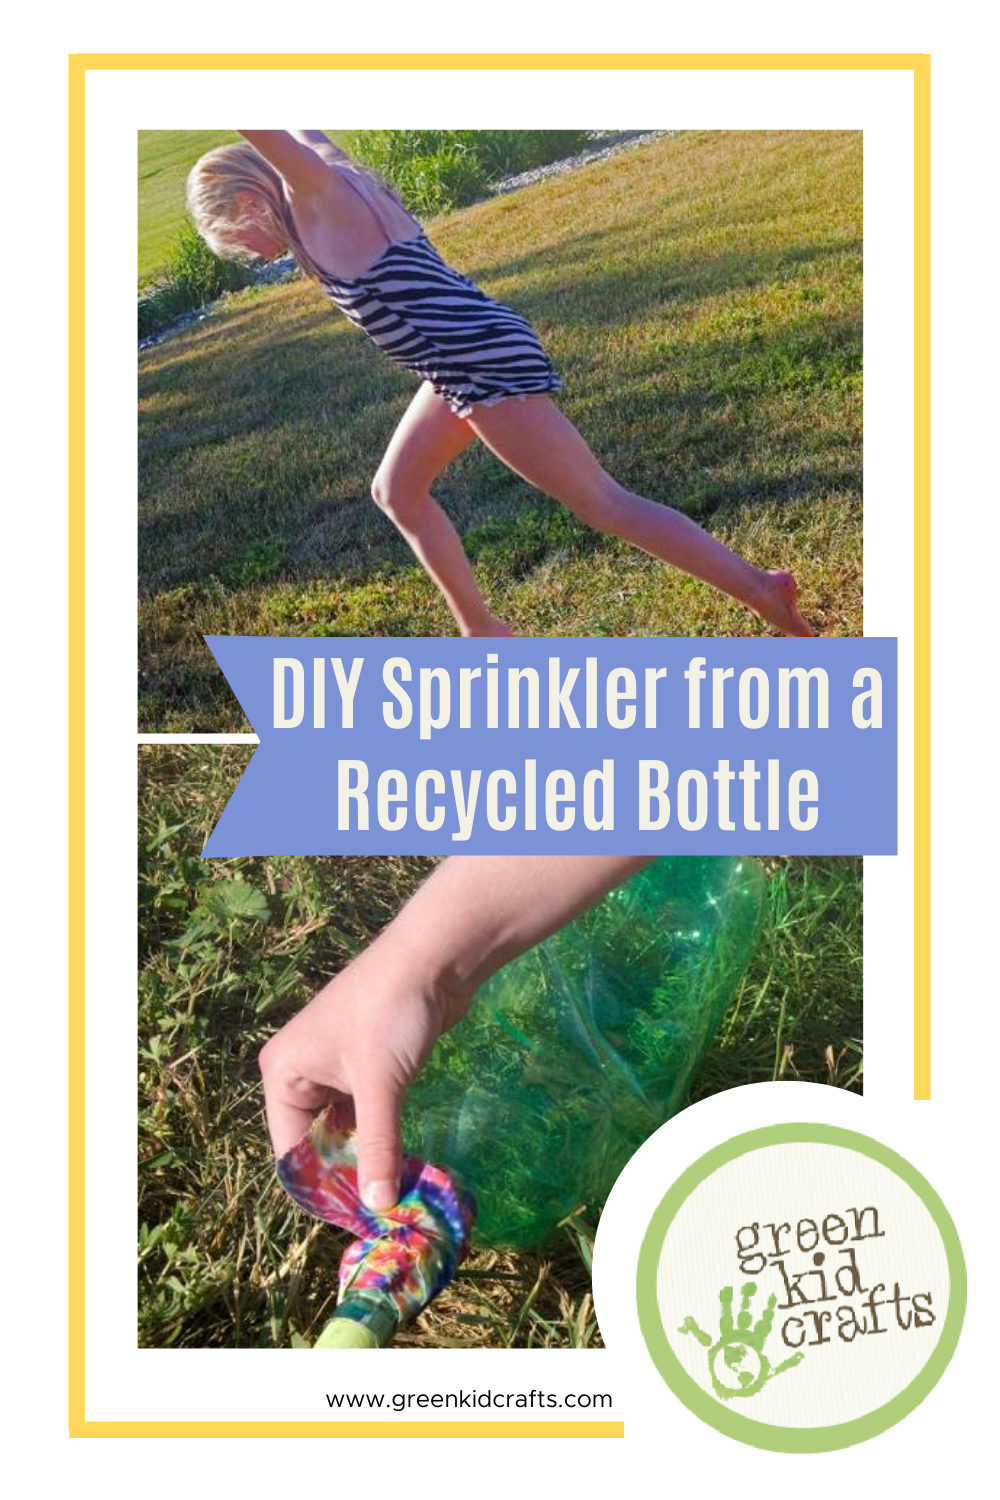 Summer Fun: Make a DIY Sprinkler from a Recycled Bottle - Green Kid Crafts